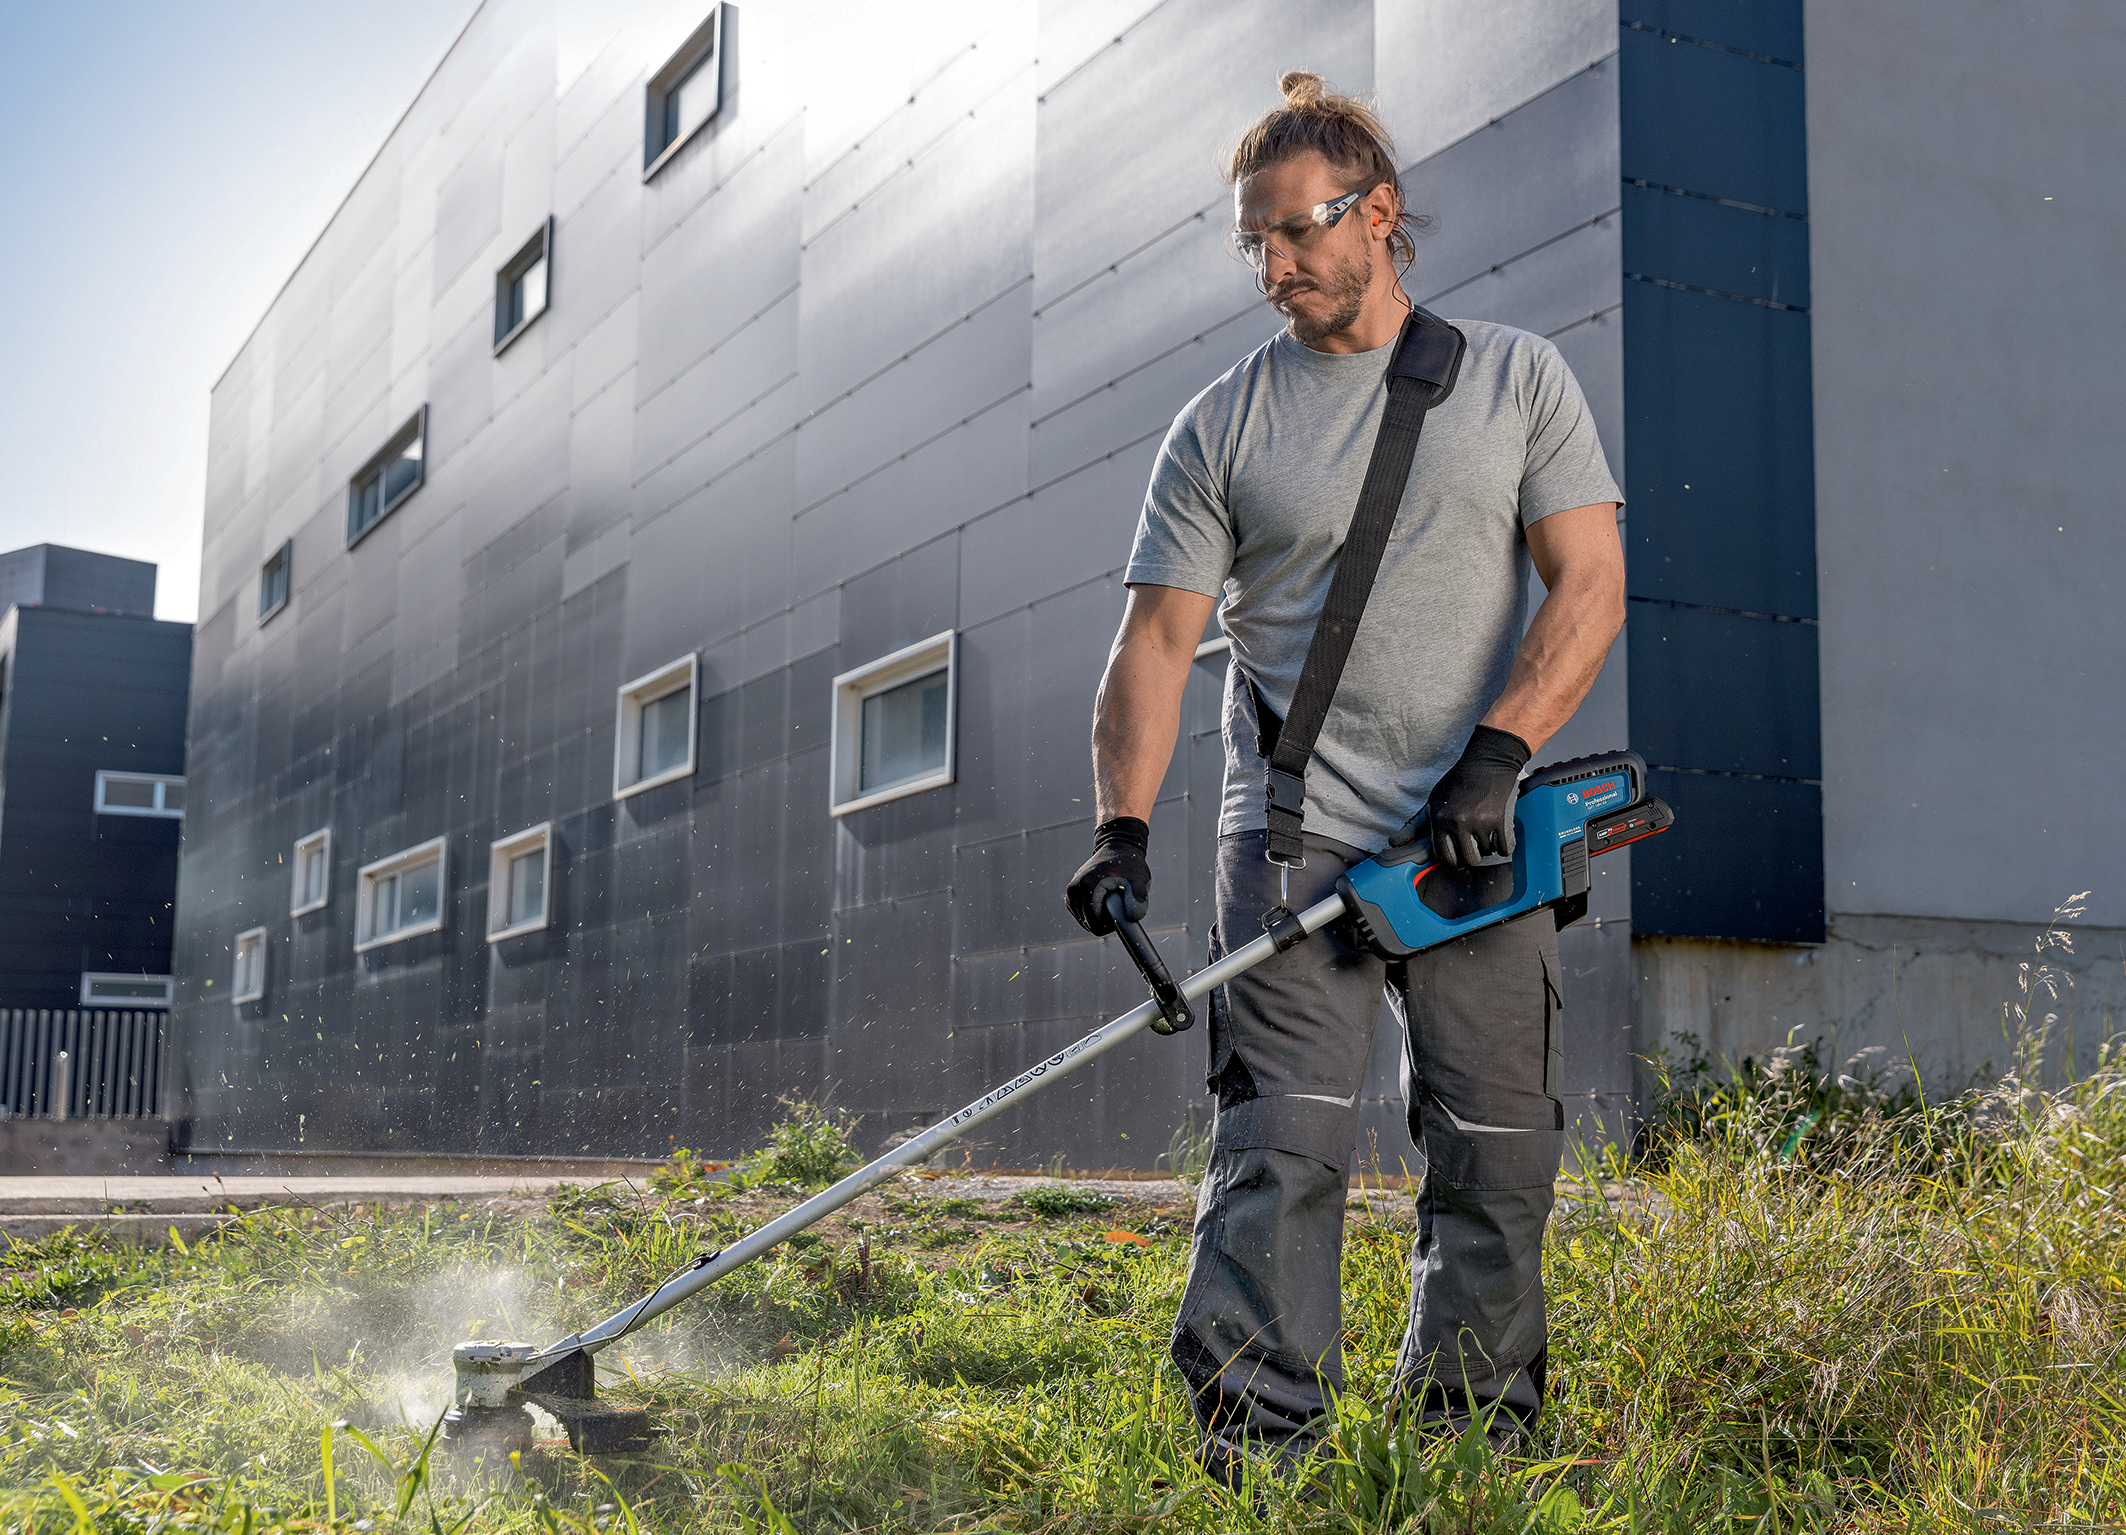 Optimized for professional use: GRT 18V-33 Professional cordless grass trimmer from Bosch